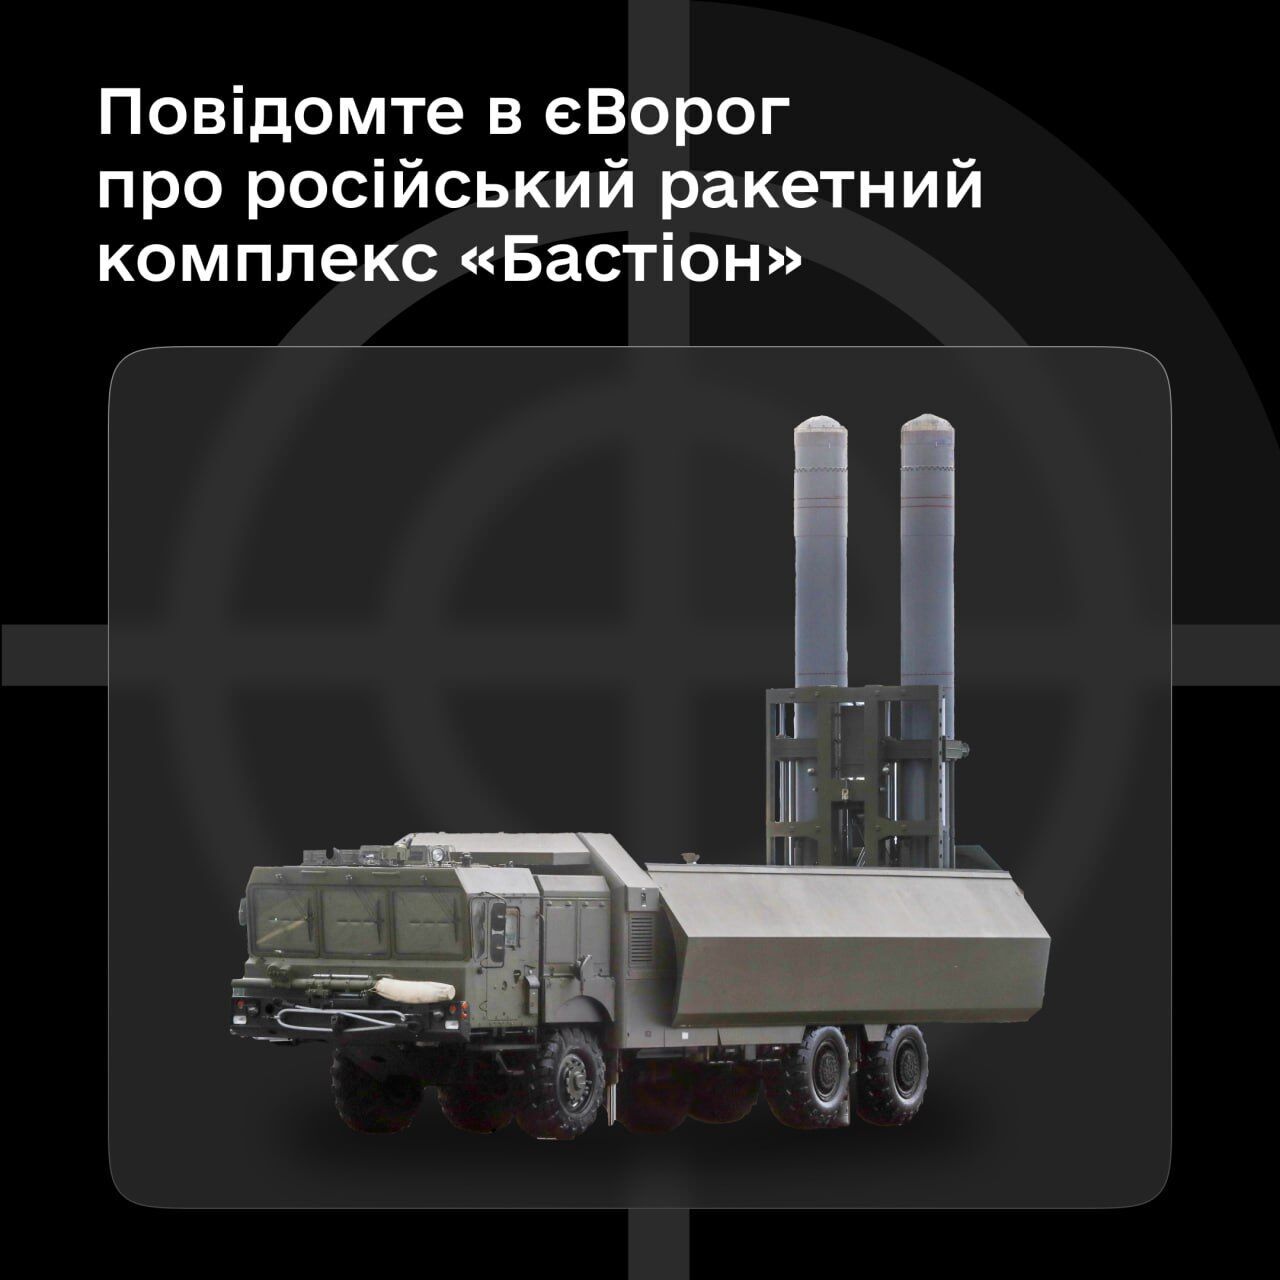 ''From this missile system that Zircons are launched'': Ukrainians in Crimea were called to share information about the Russian Bastion missile system